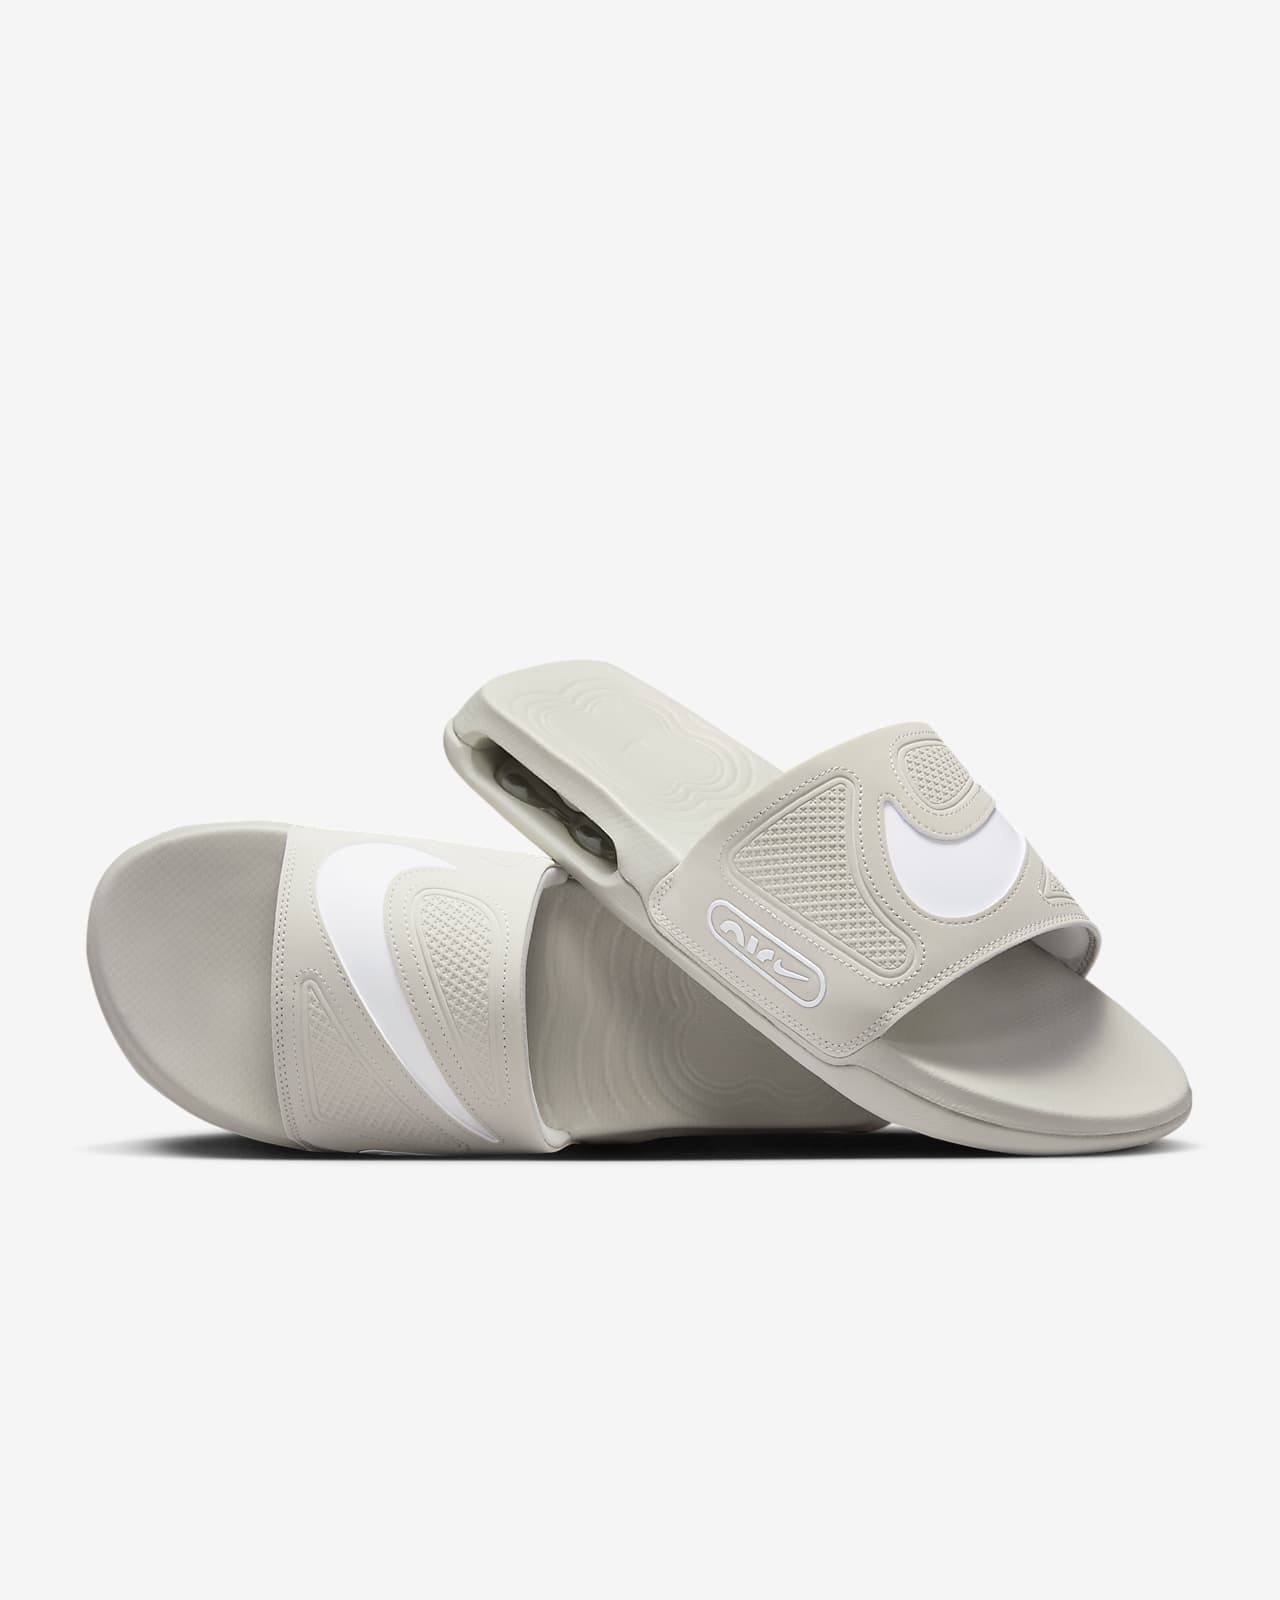 FASHION, TRENDS, CONCEPT-AND-NOTES, NIKE-NOVELTIES-FASHION-COMFORT-IN- SANDALS - SERMA.NET